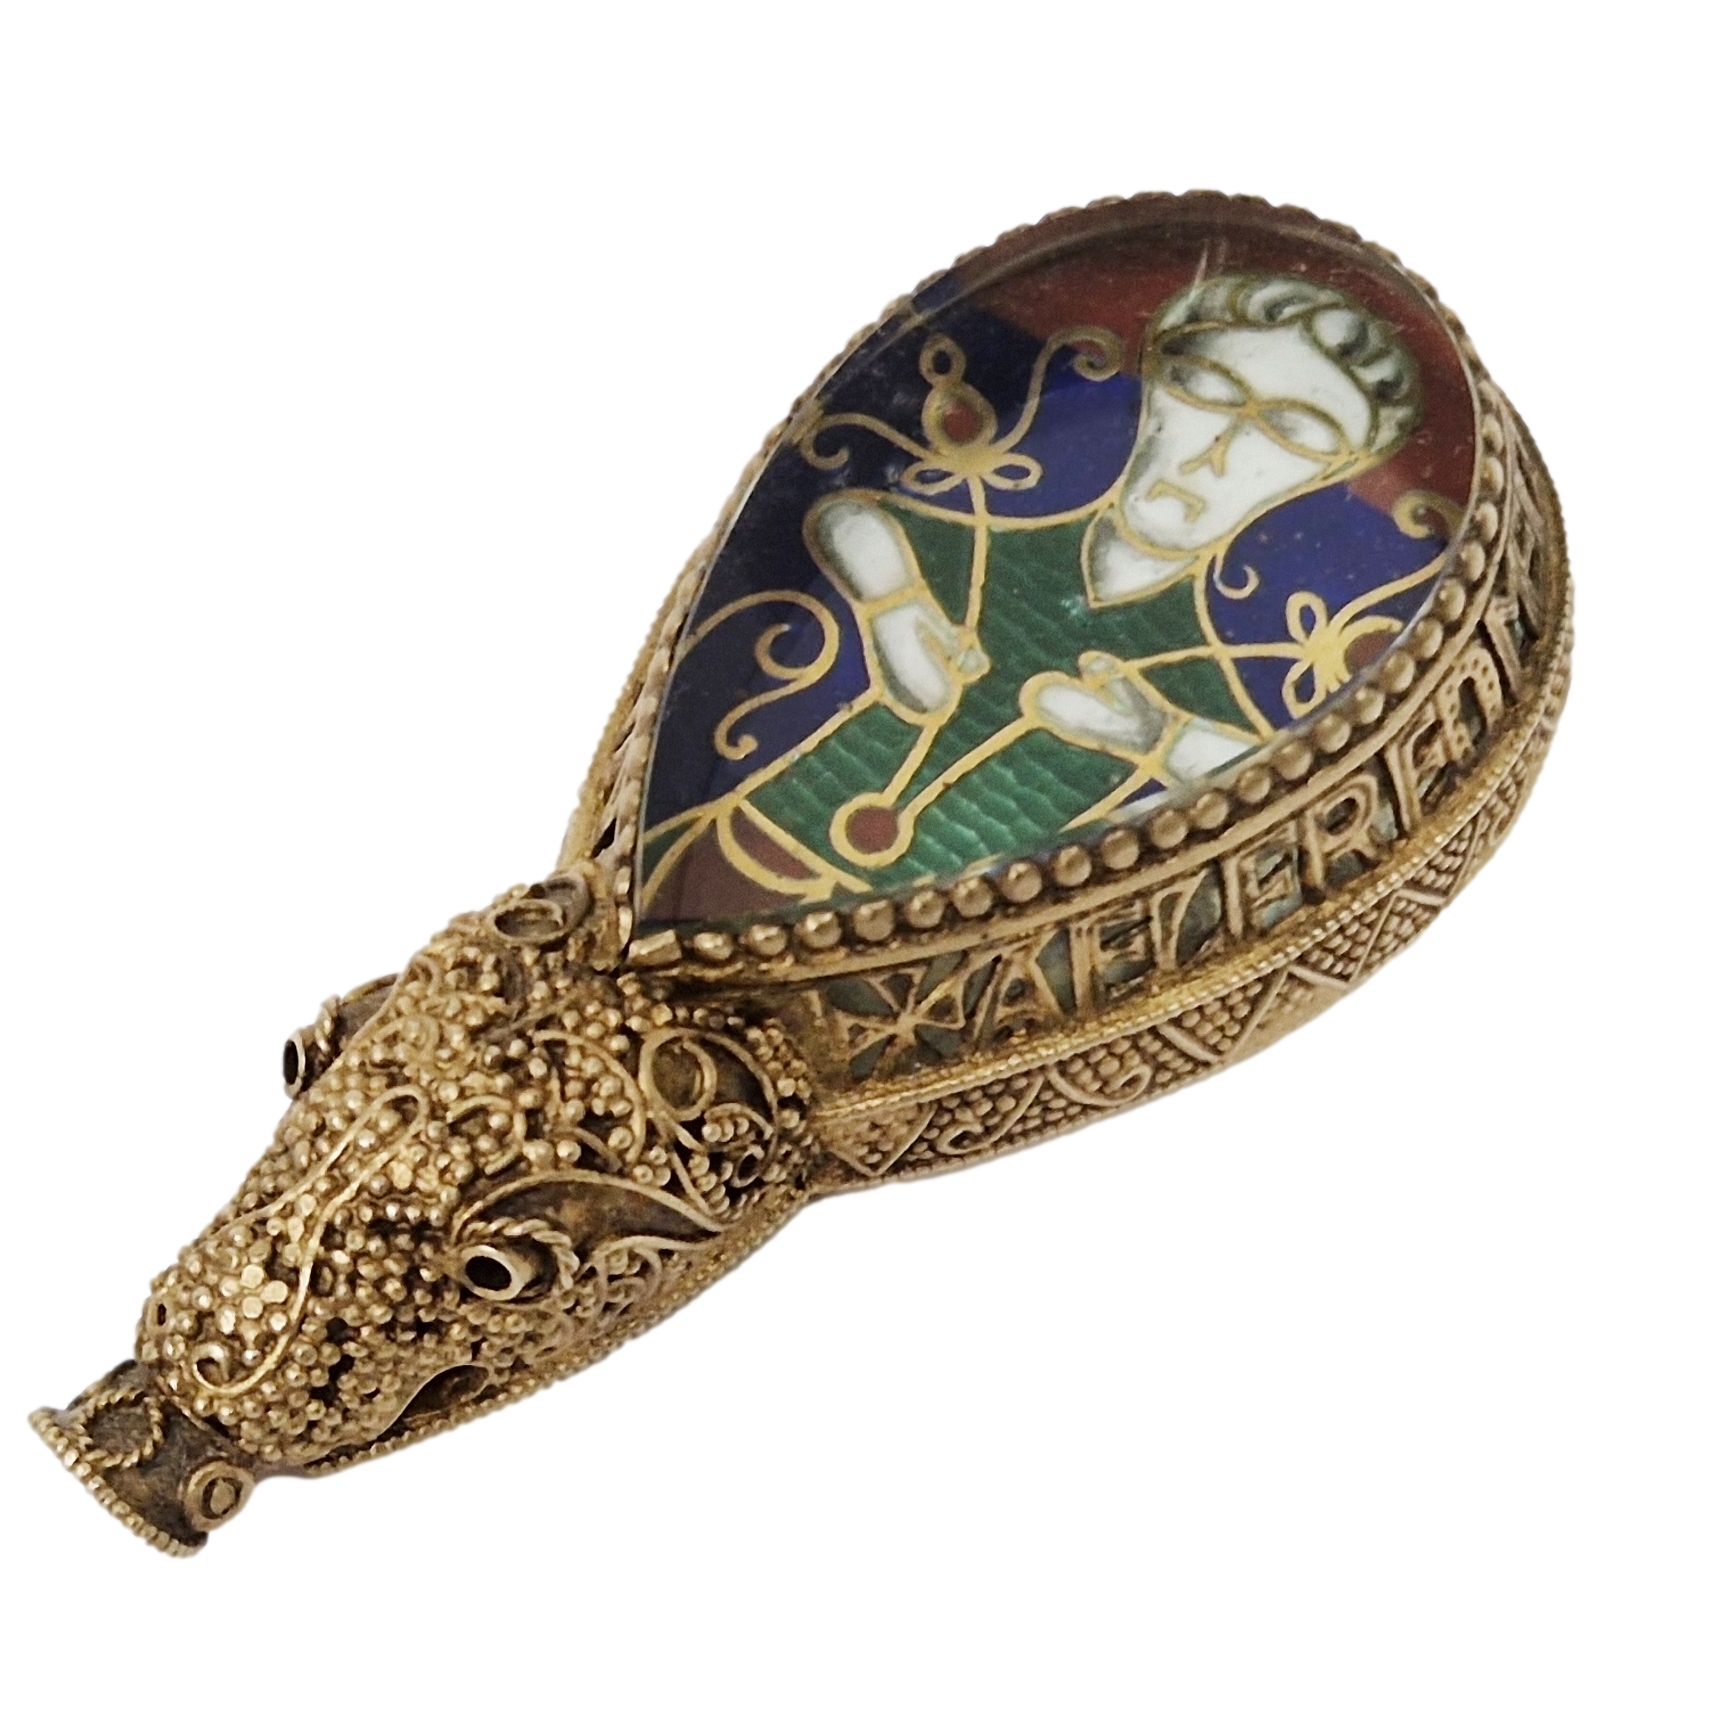 Copy of the 'Alfred Jewel' silver gilt having polychrome enamel medieval male figure beneath teardrop glass panel sold for £1,250_clipped_rev_1